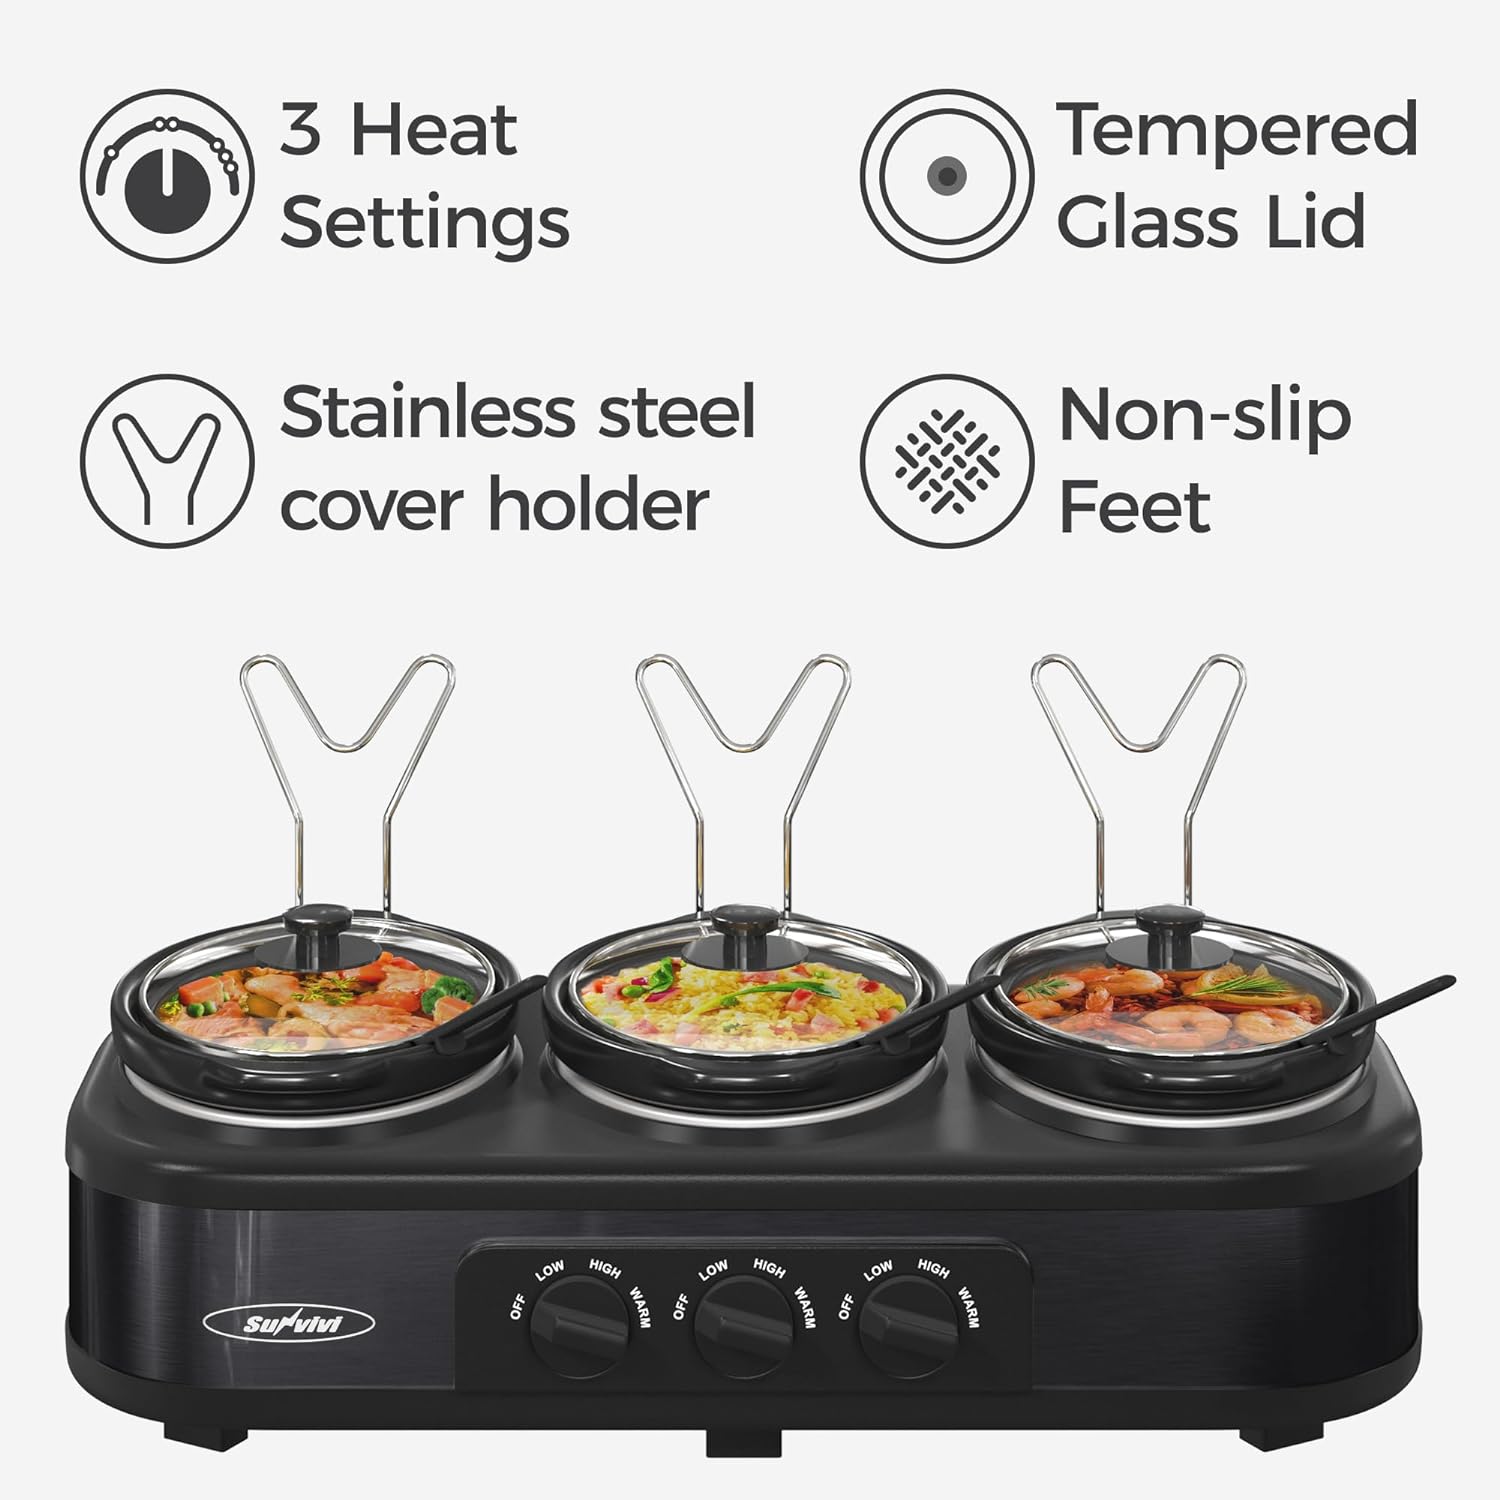 Sunvivi Triple Slow Cooker Buffet Servers and Warmer,3 Pot Food Small Mini Manual Slow Cooker with Adjustable Temp Stainless Steel Lid Rests,Removable Ceramic Pot,4.5 QT Black